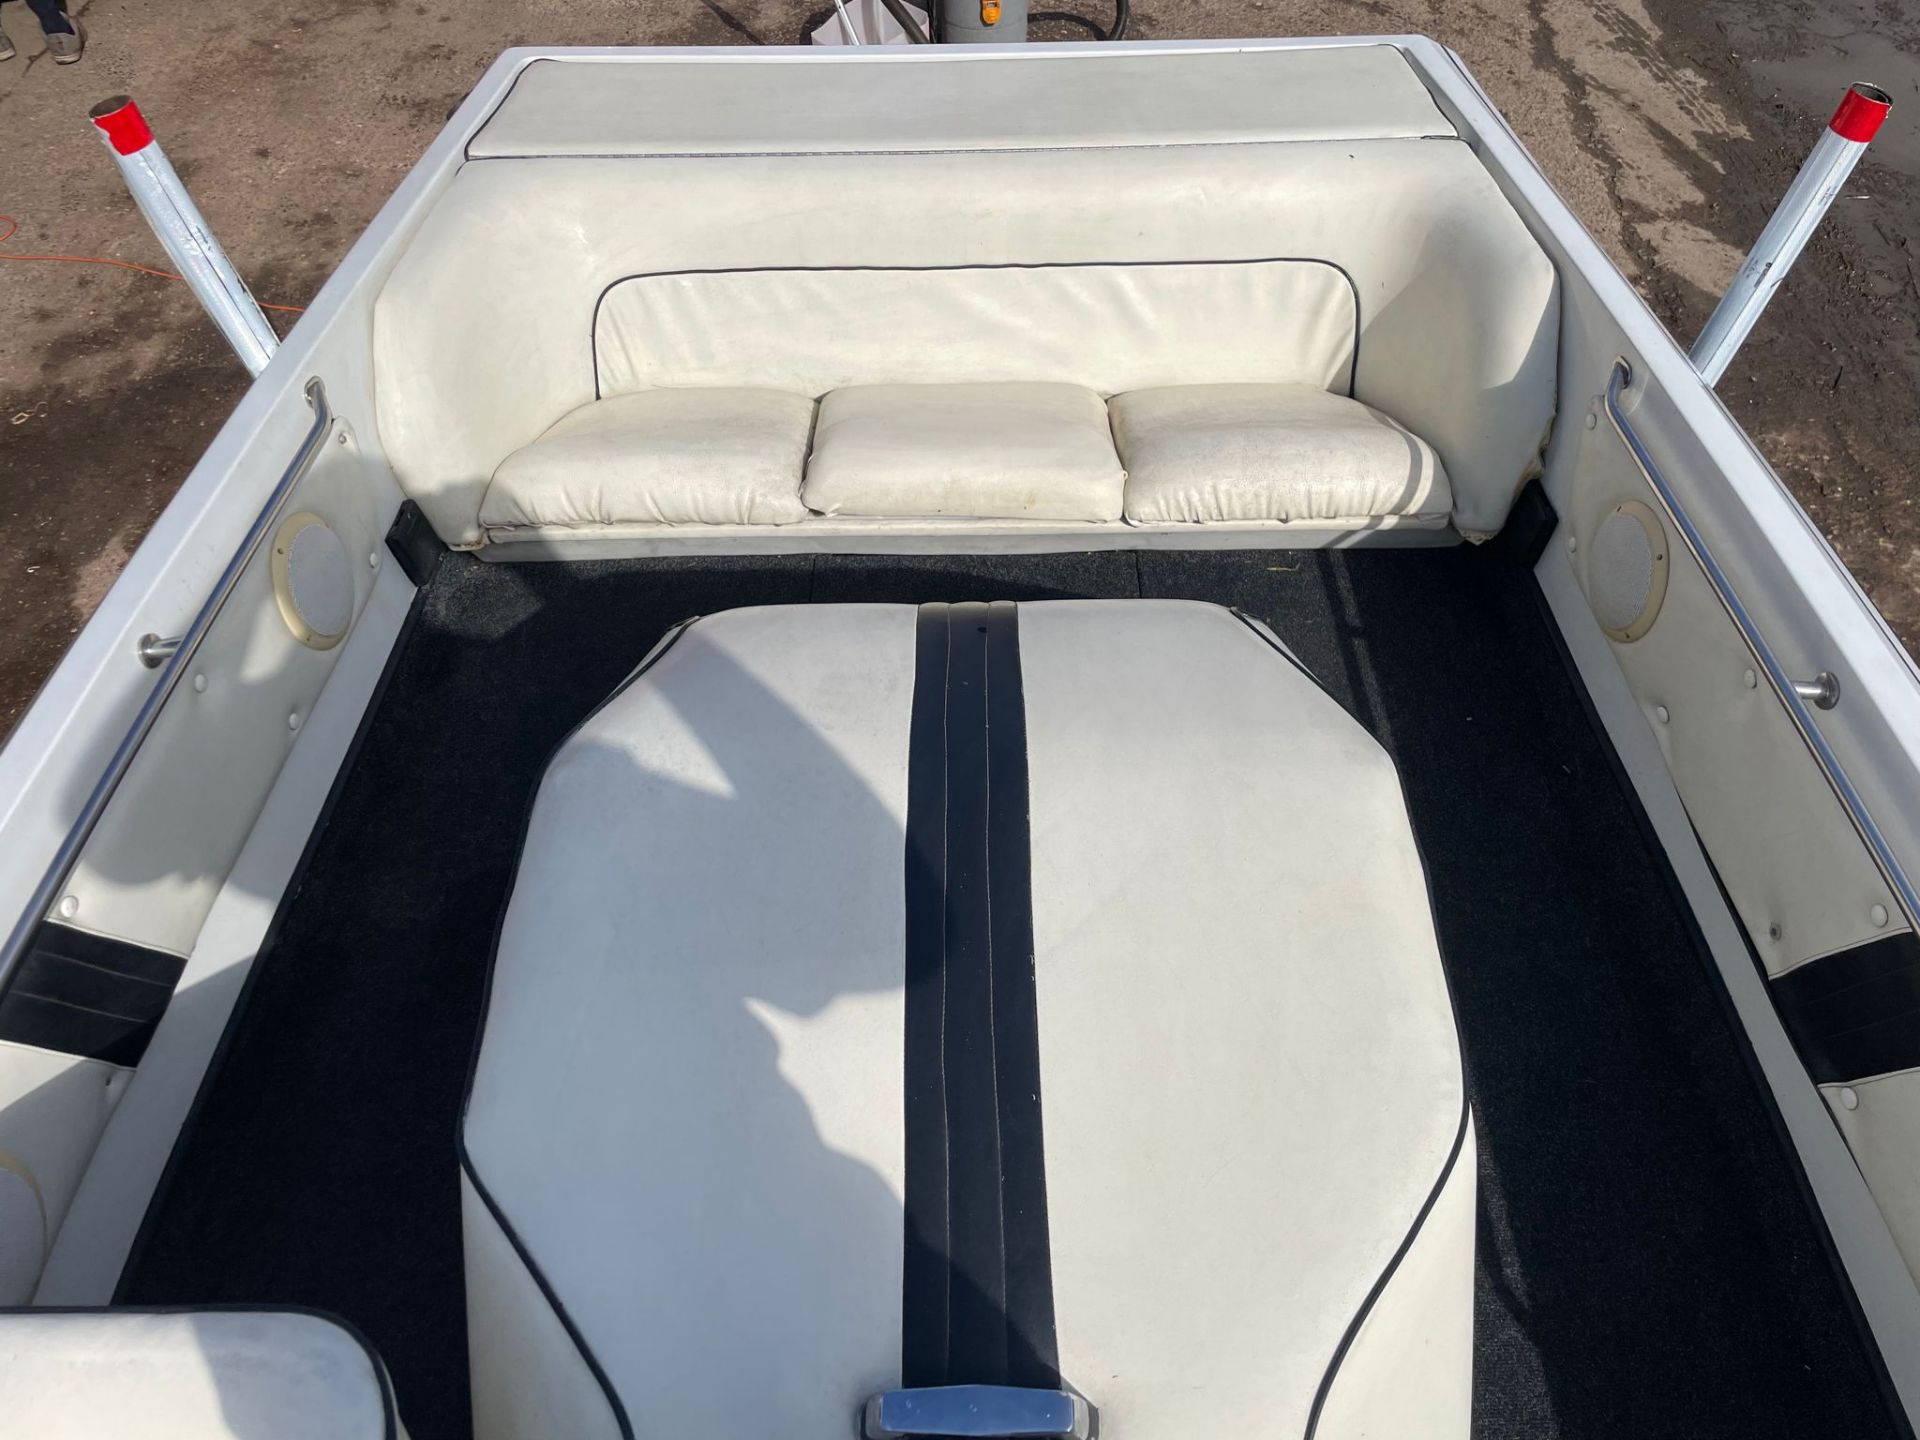 SUPRA BOAT, C/W TRAILER, RUNS AND WORKS ON LPG GAS *NO VAT* - Image 12 of 12